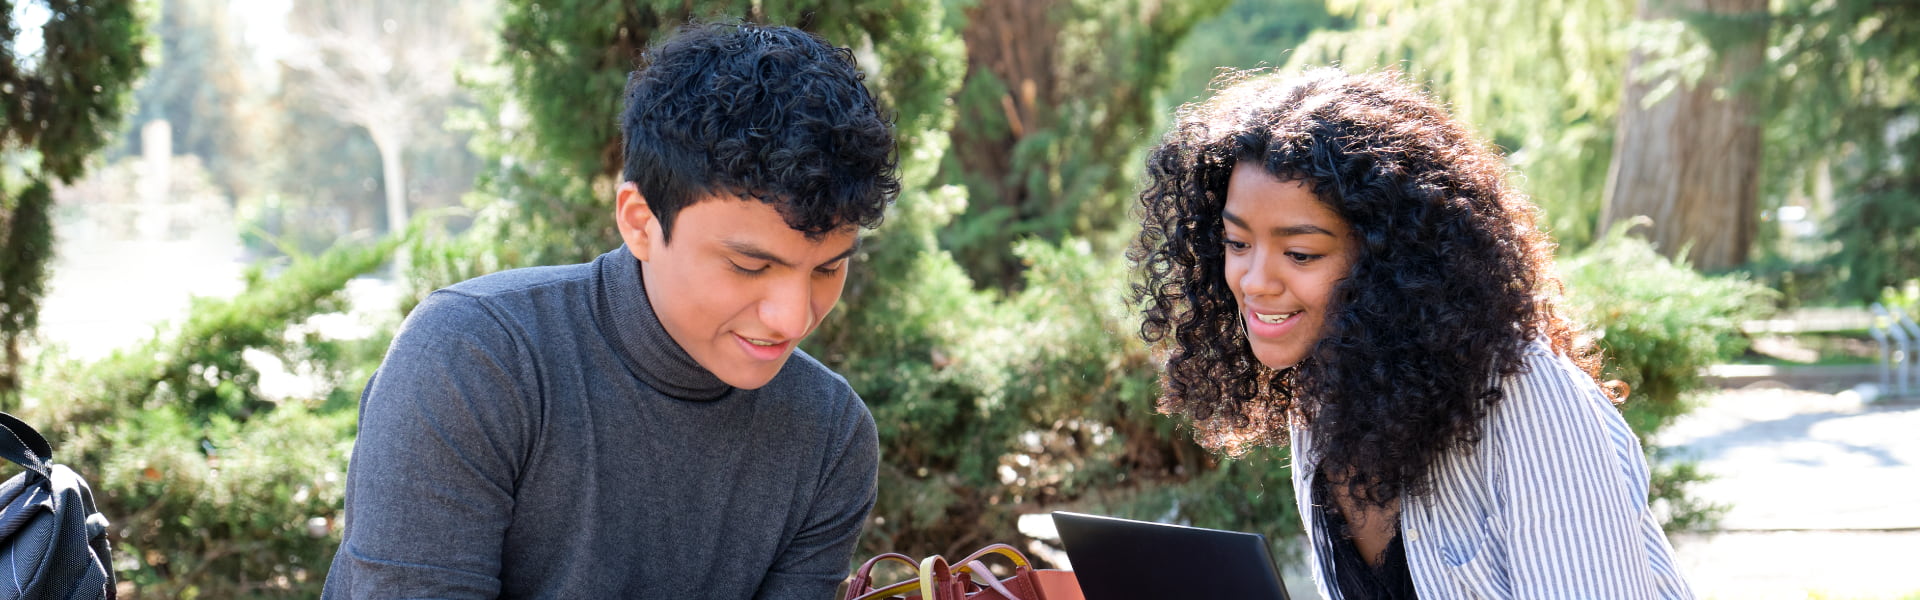 Students outdoors studying with a laptop